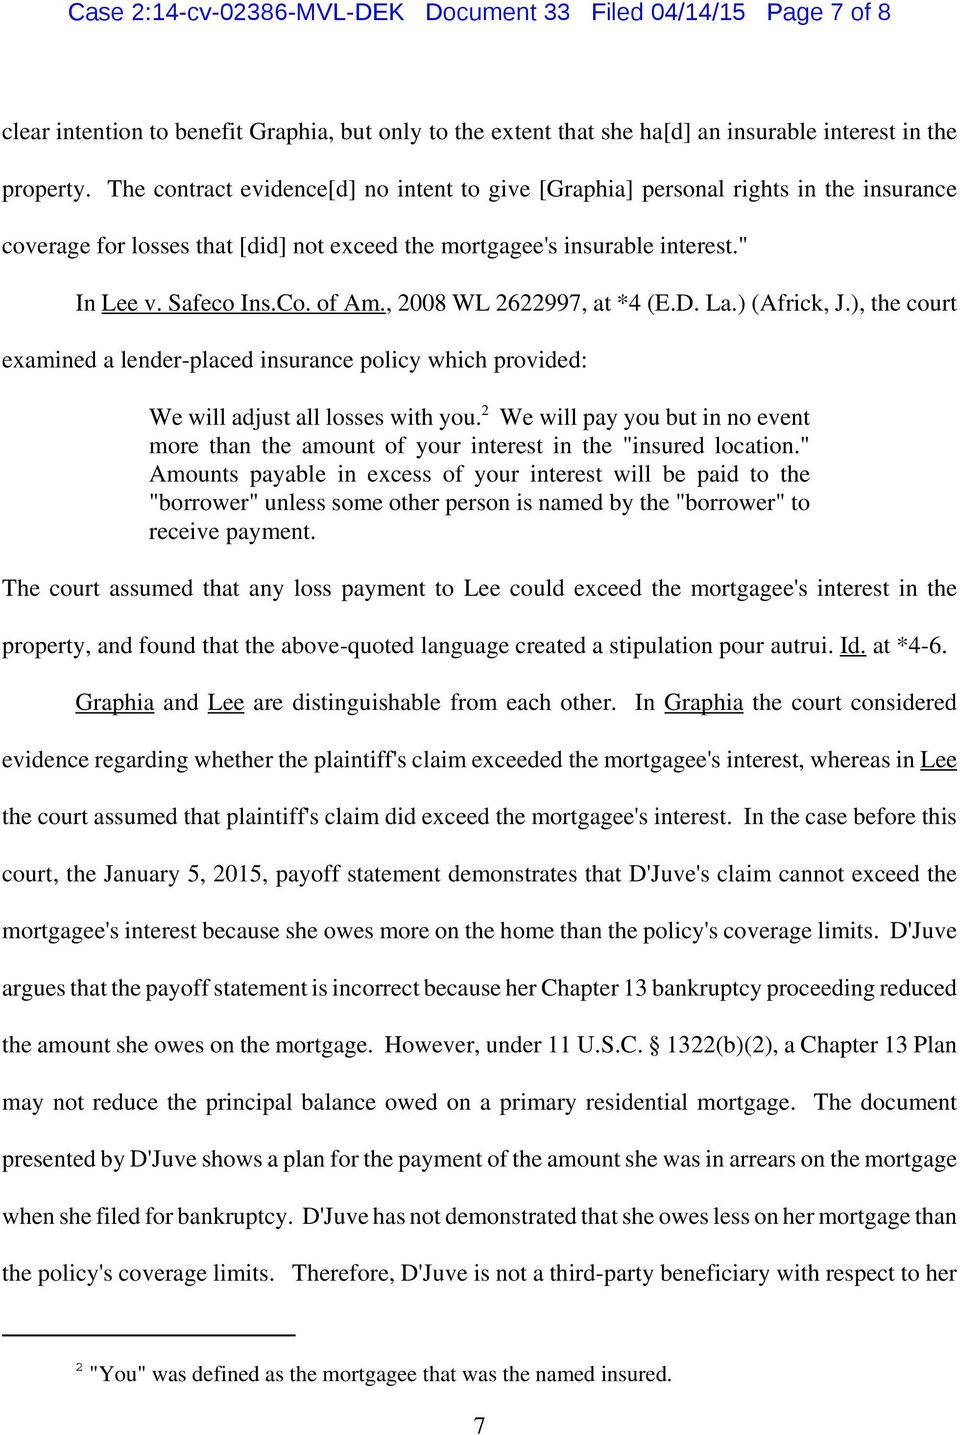 , 2008 WL 2622997, at *4 (E.D. La.) (Africk, J.), the court examined a lender-placed insurance policy which provided: We will adjust all losses with you.